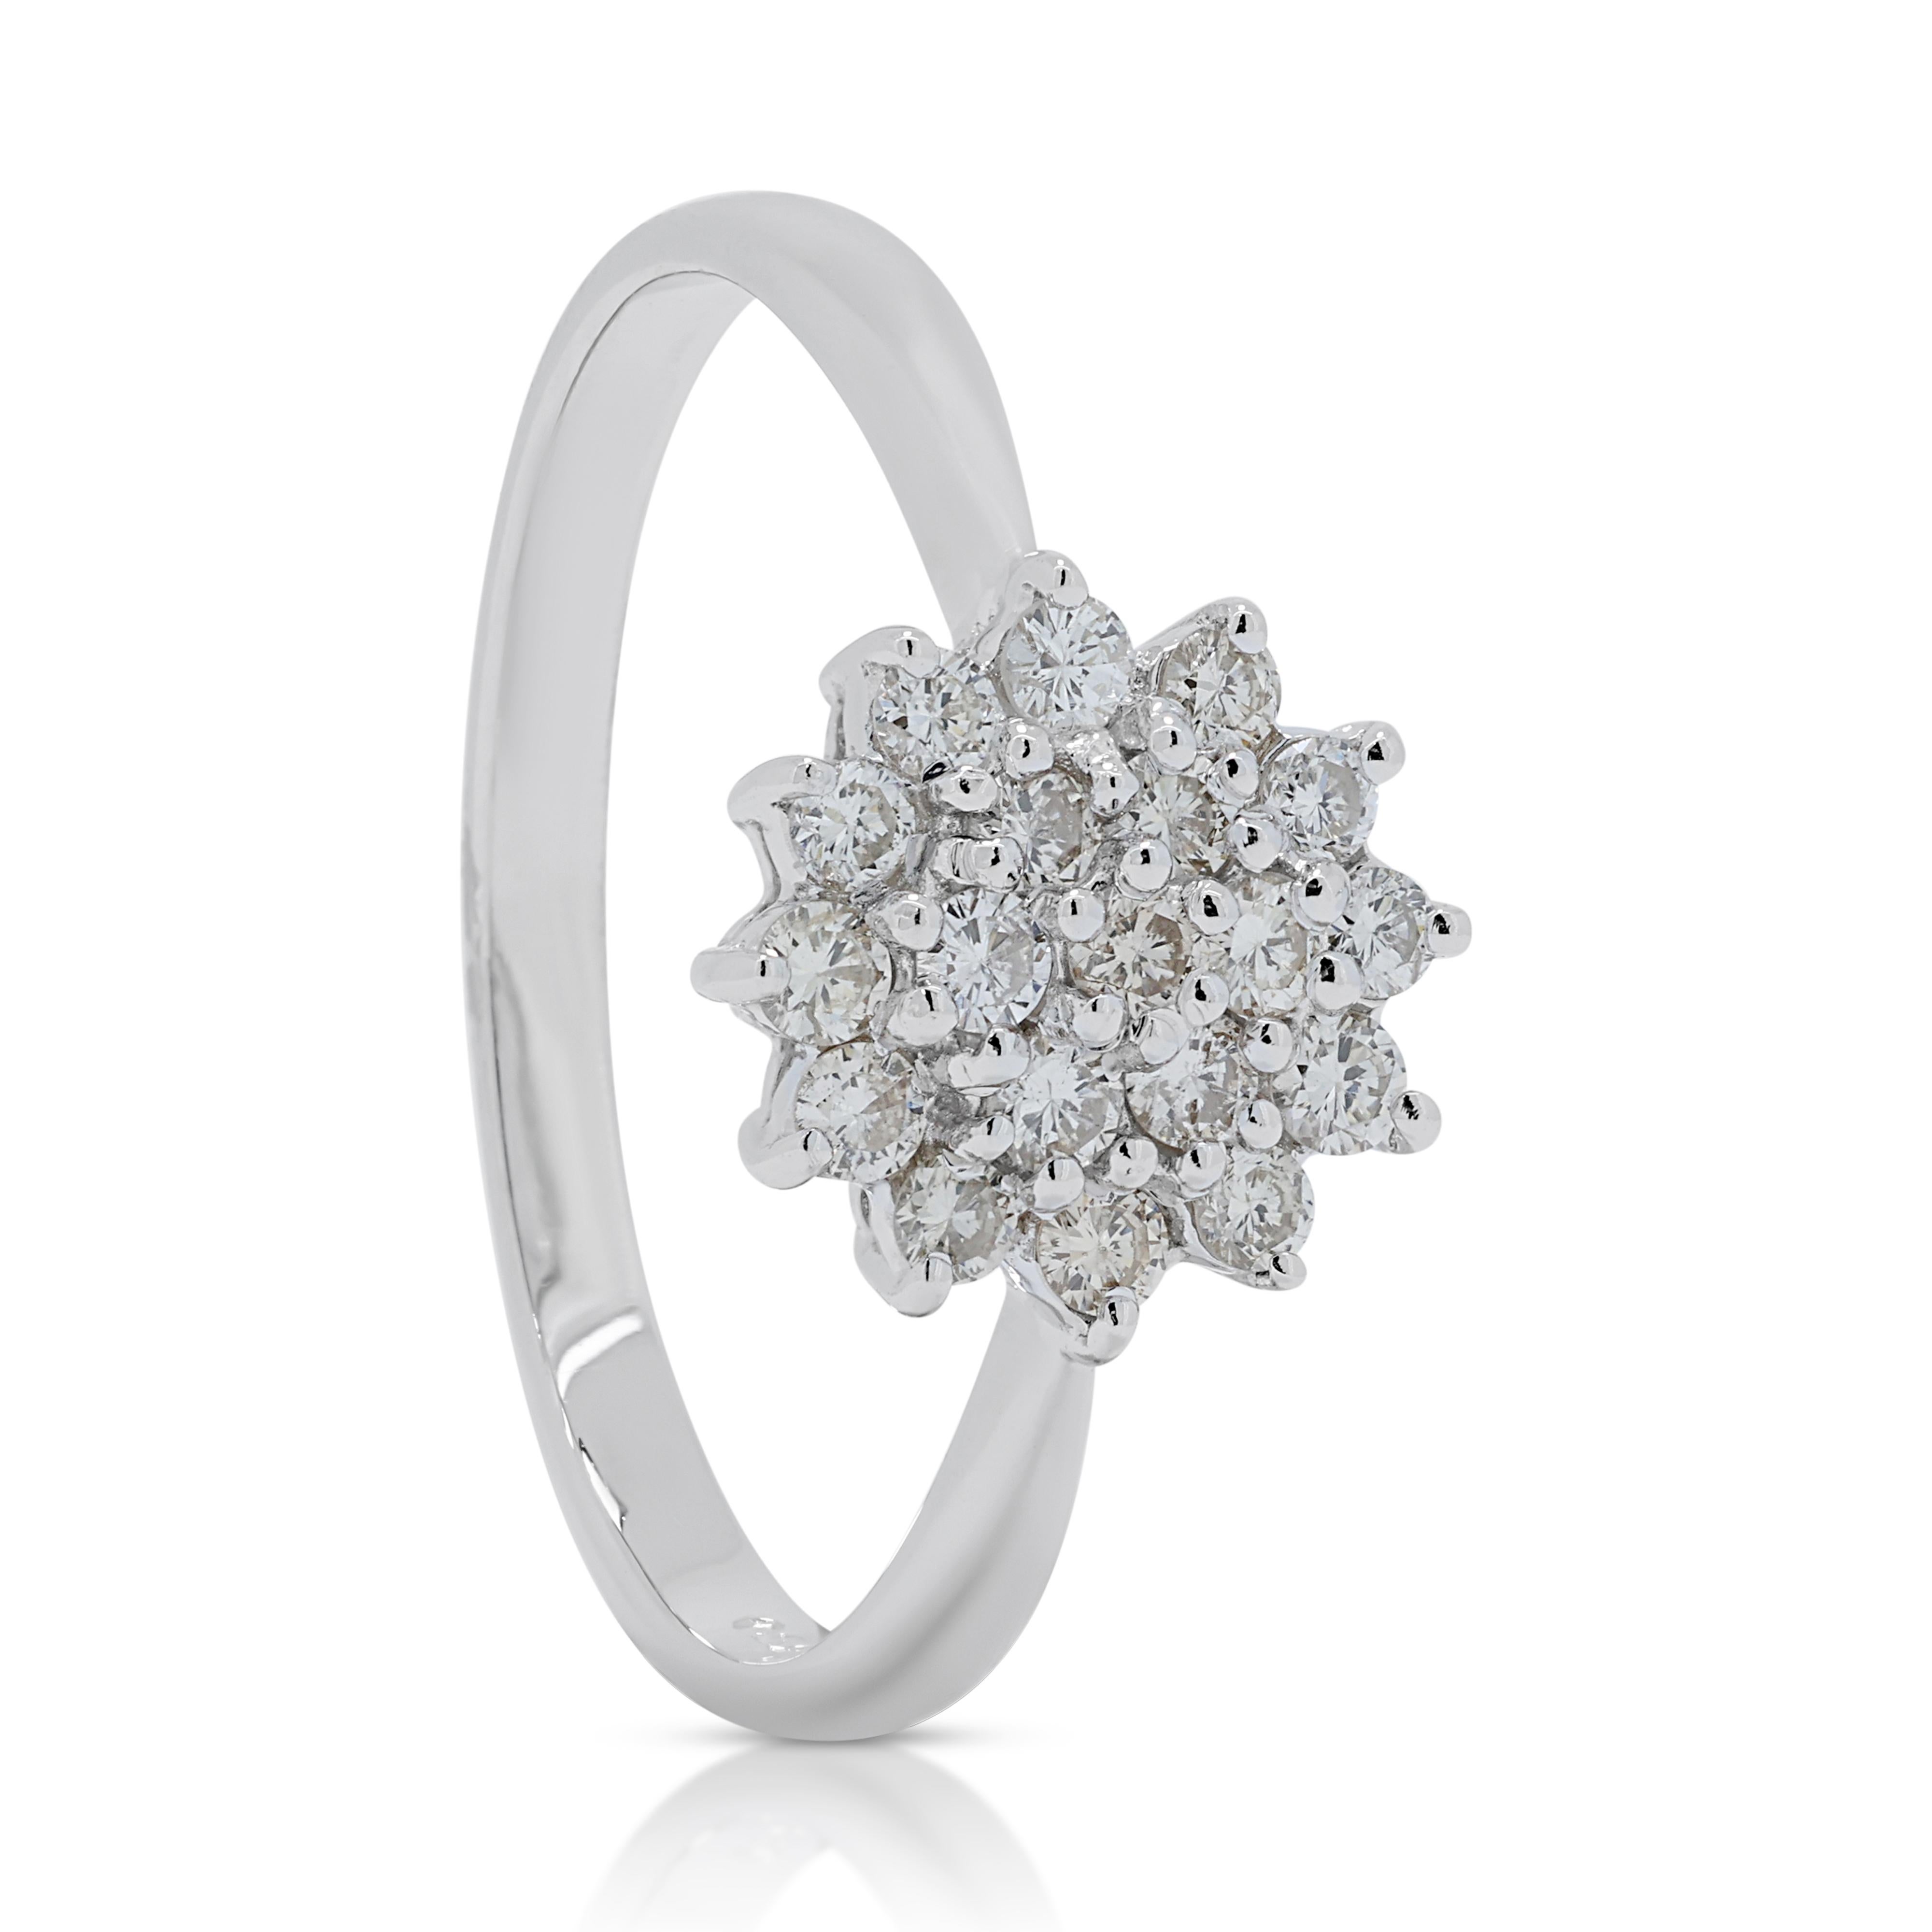 Captivating 0.4ct Diamond Stud Ring in 18K White Gold In Excellent Condition For Sale In רמת גן, IL